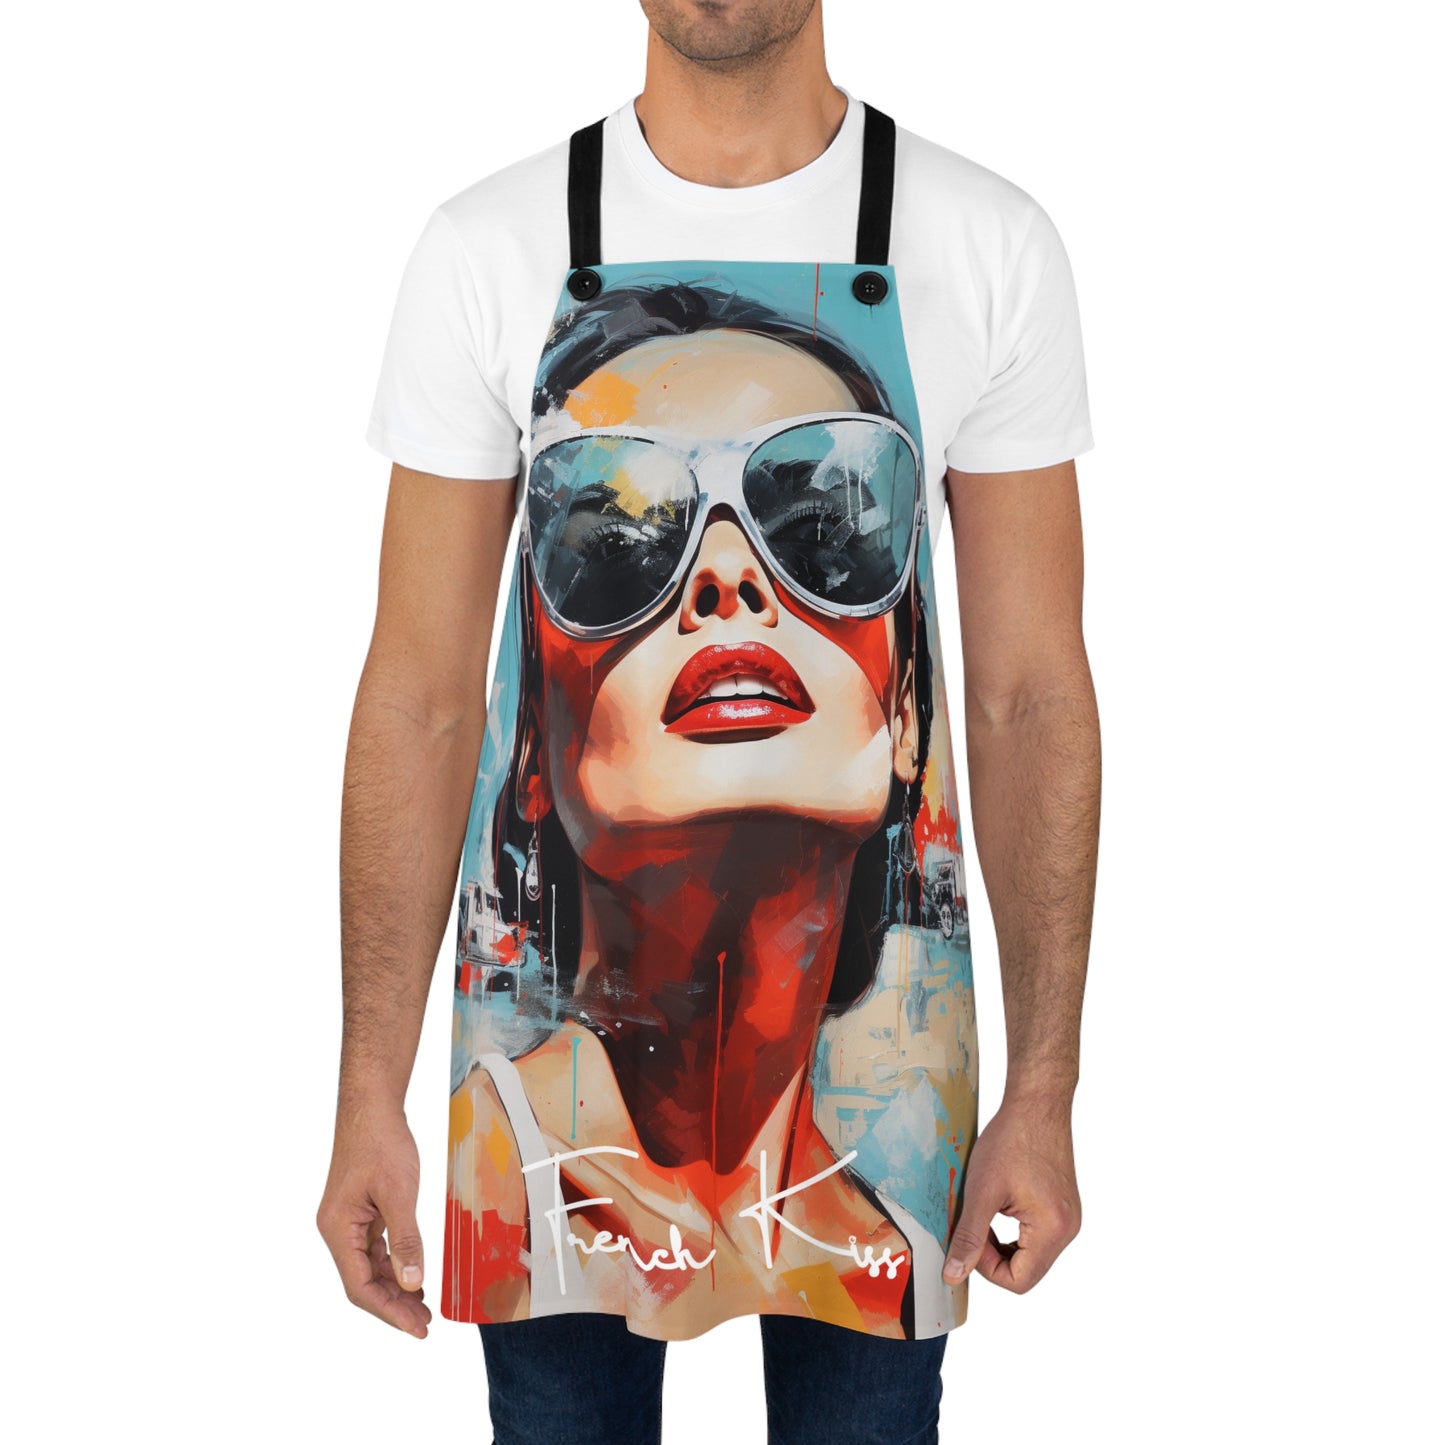 DANS MES YEUX Chef APRON, French Couture, Pop Art, Travel, Fashion, Gourmet, Cuisine, Cook, France, must have gift item